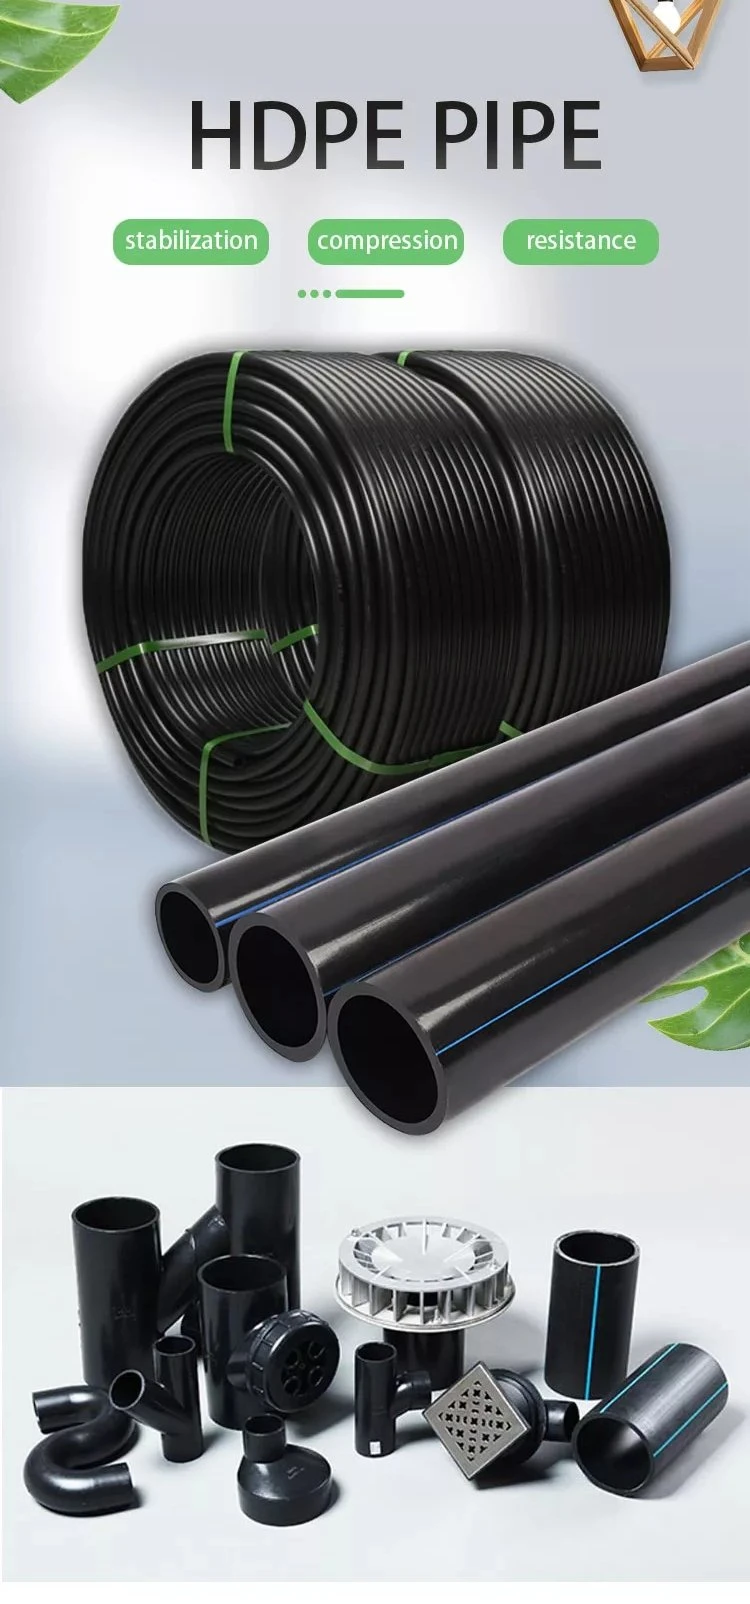 China PPR PVC HDPE Plastic Casing Irrigation High Pressure Pipes for Hot&amp; Cold Water